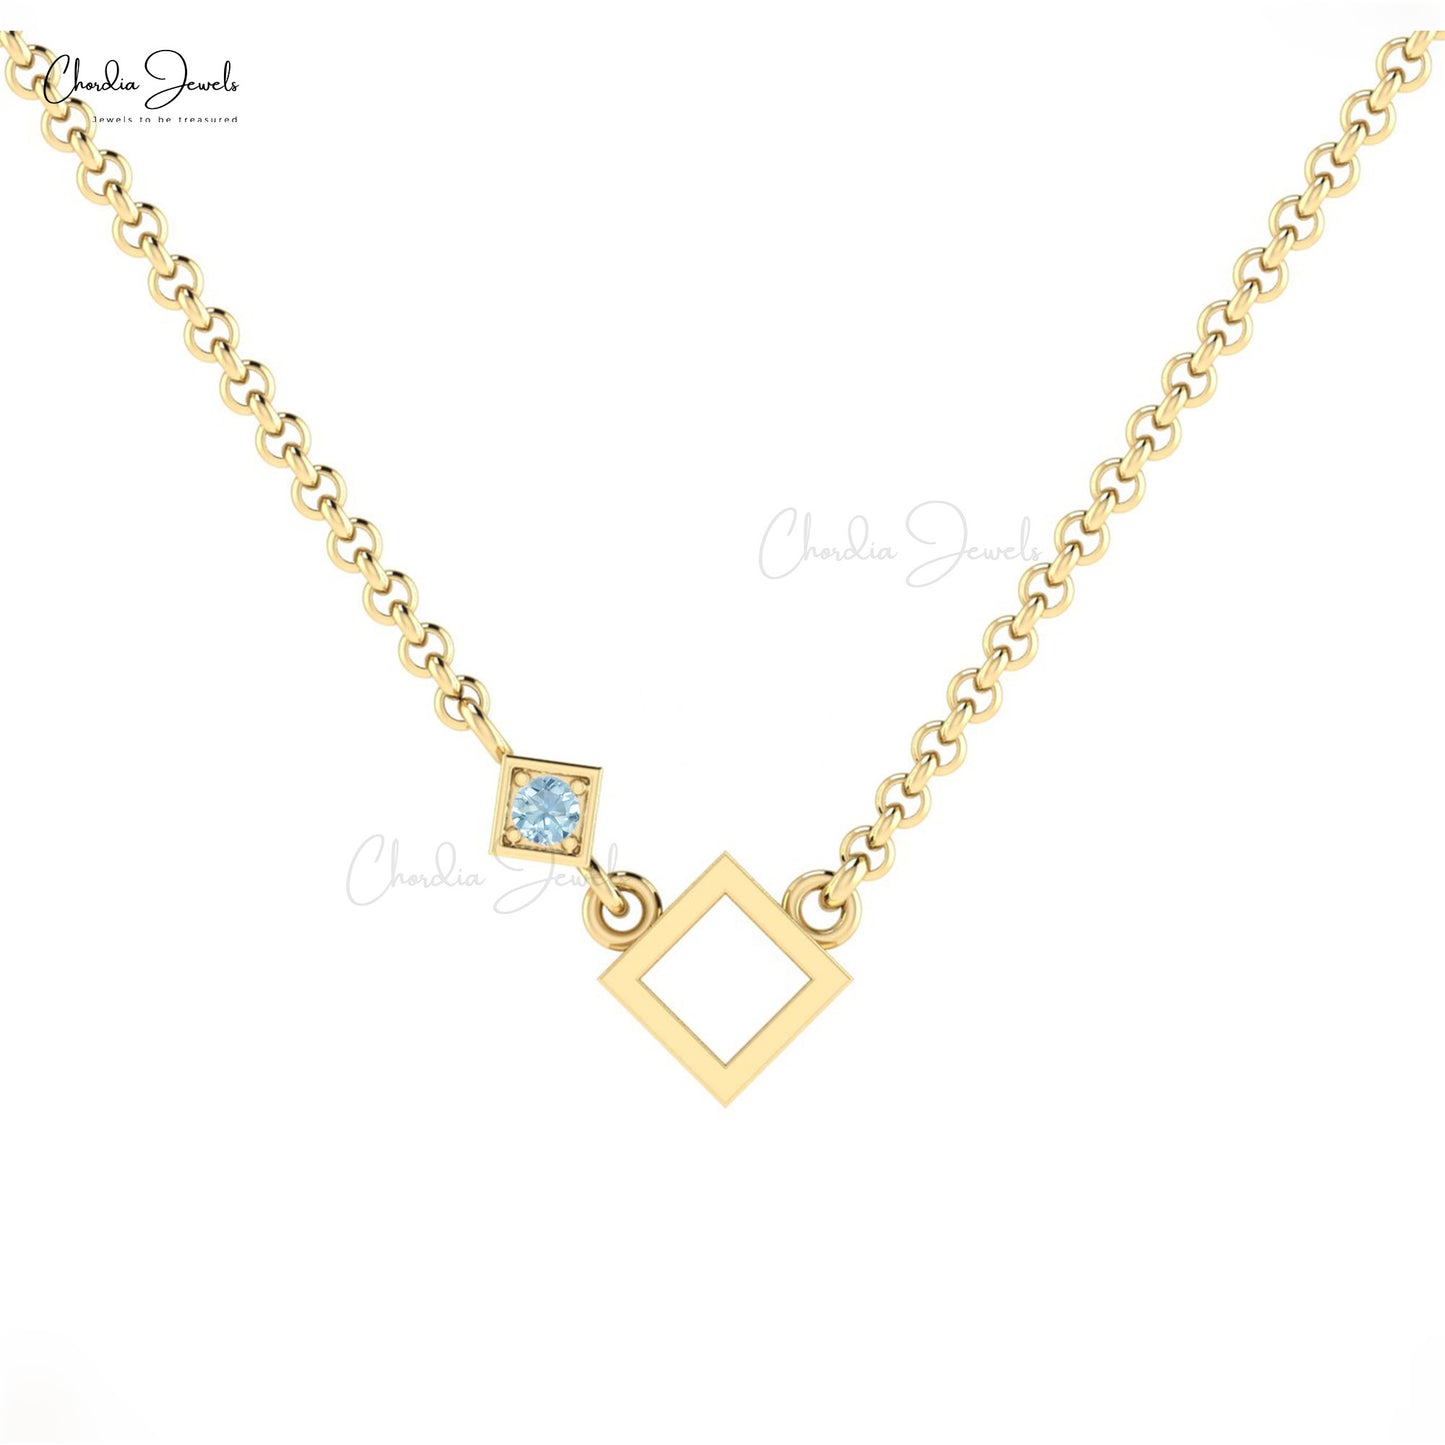 Trendy Geometric Open Square Necklace in 14k Solid Gold March Birthstone Authentic Aquamarine Gemstone Necklace Pendant Jewelry For Engagement Gift